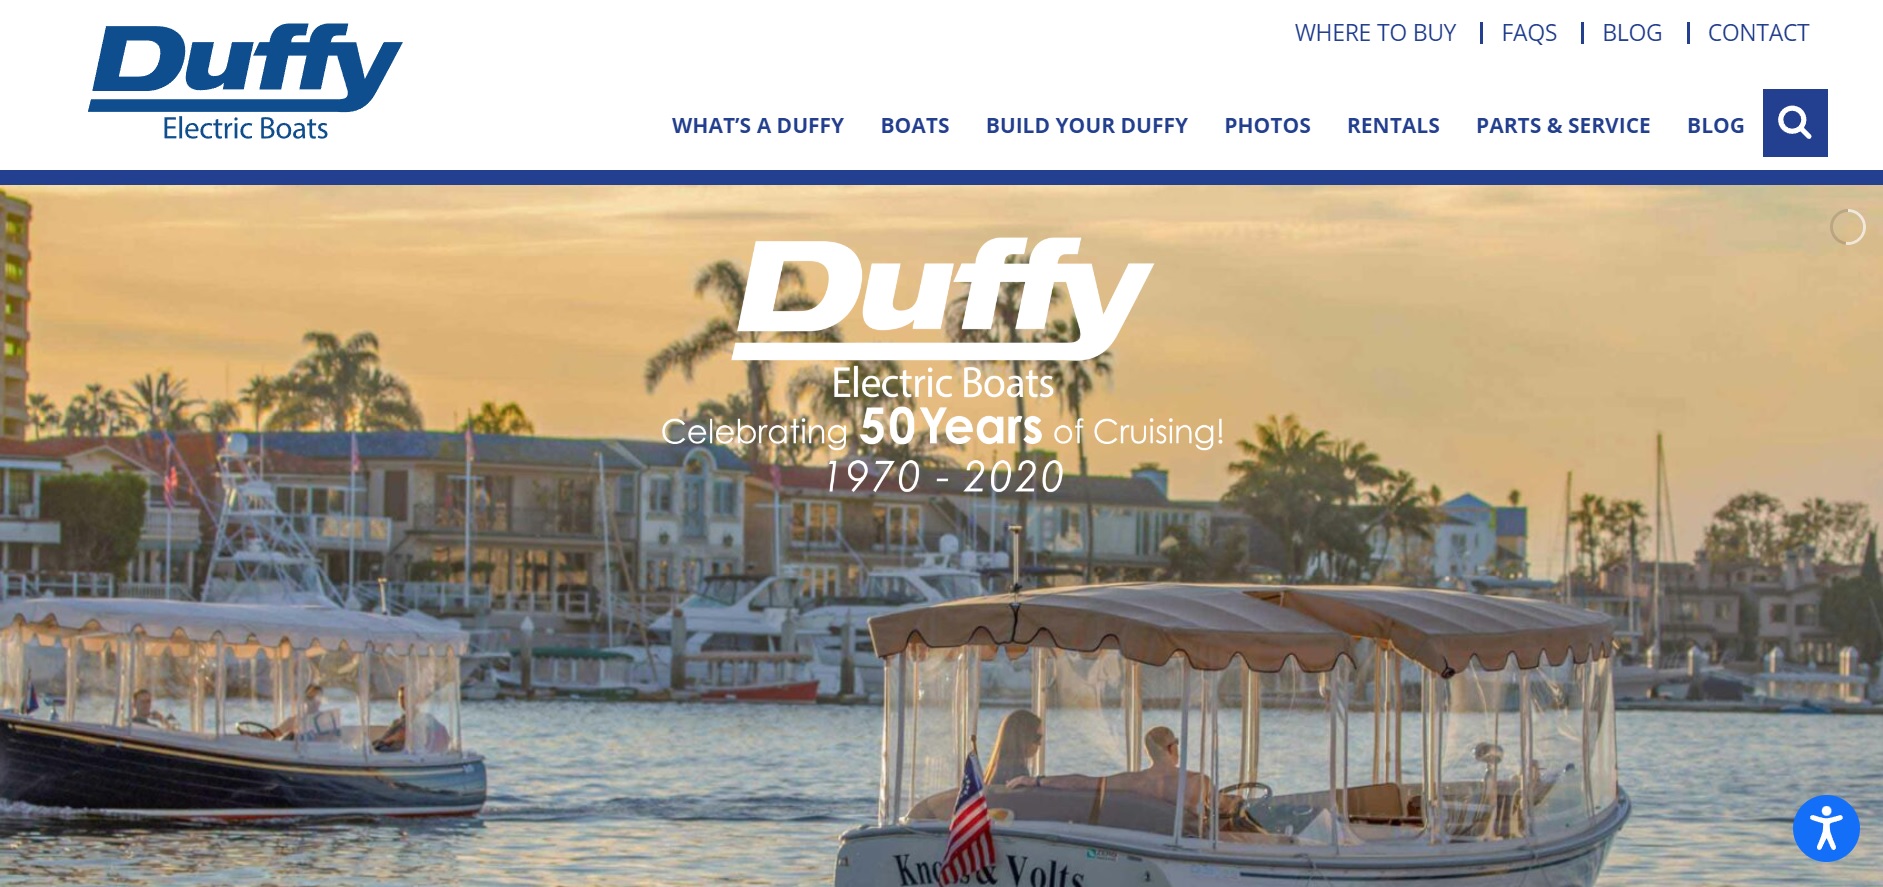 Boat Rental Website's Visibility - Duffy Electric Boats